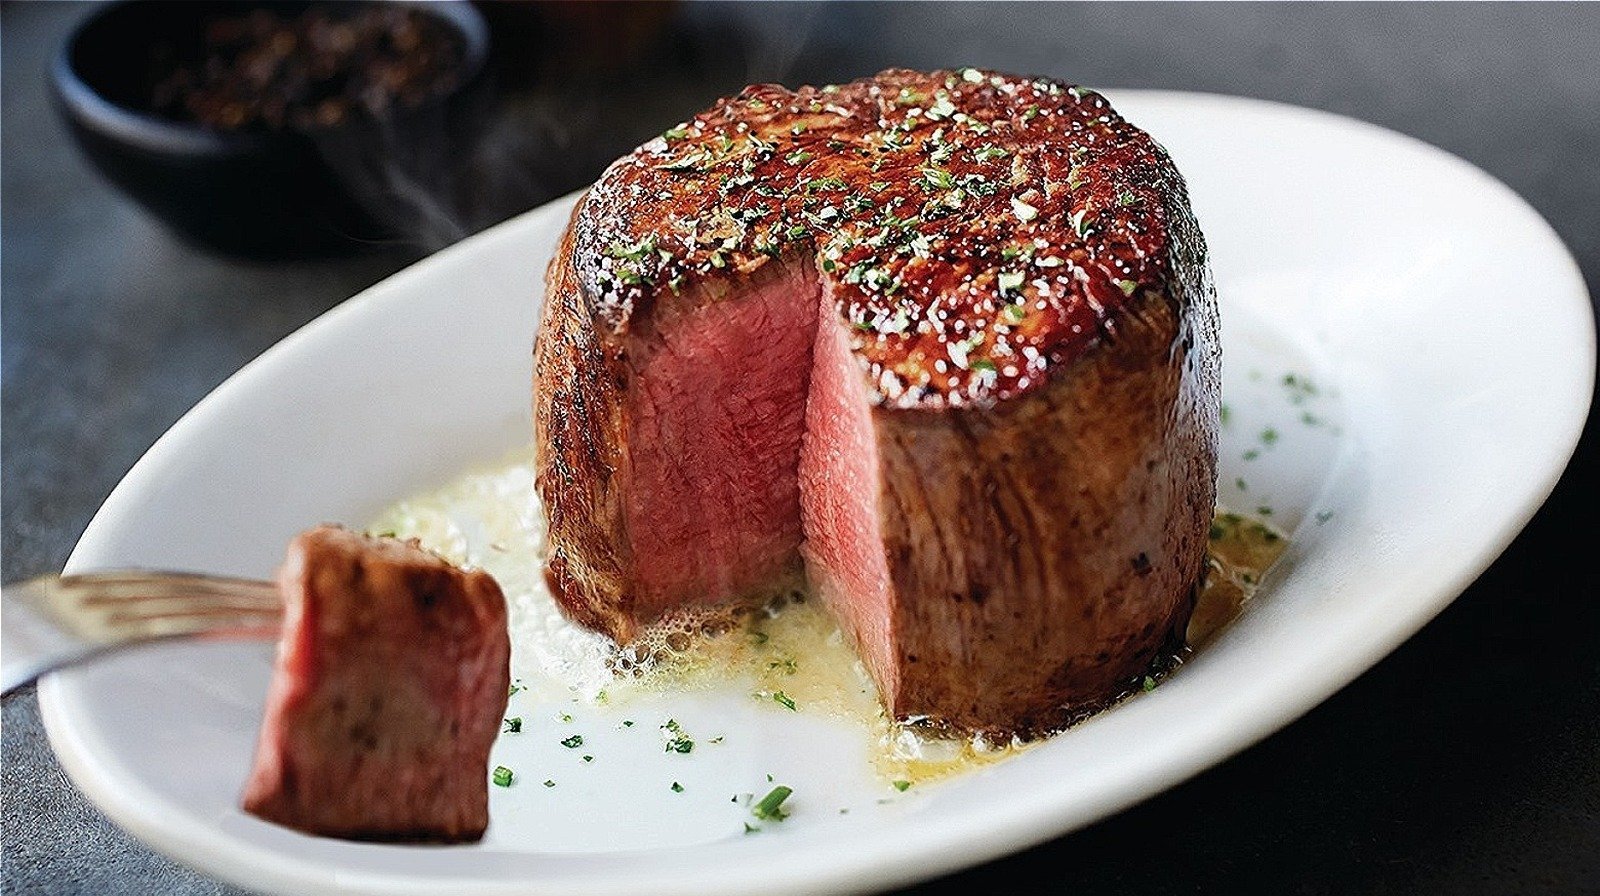 The Real Reason Why Ruth's Chris Steak House Is So Expensive